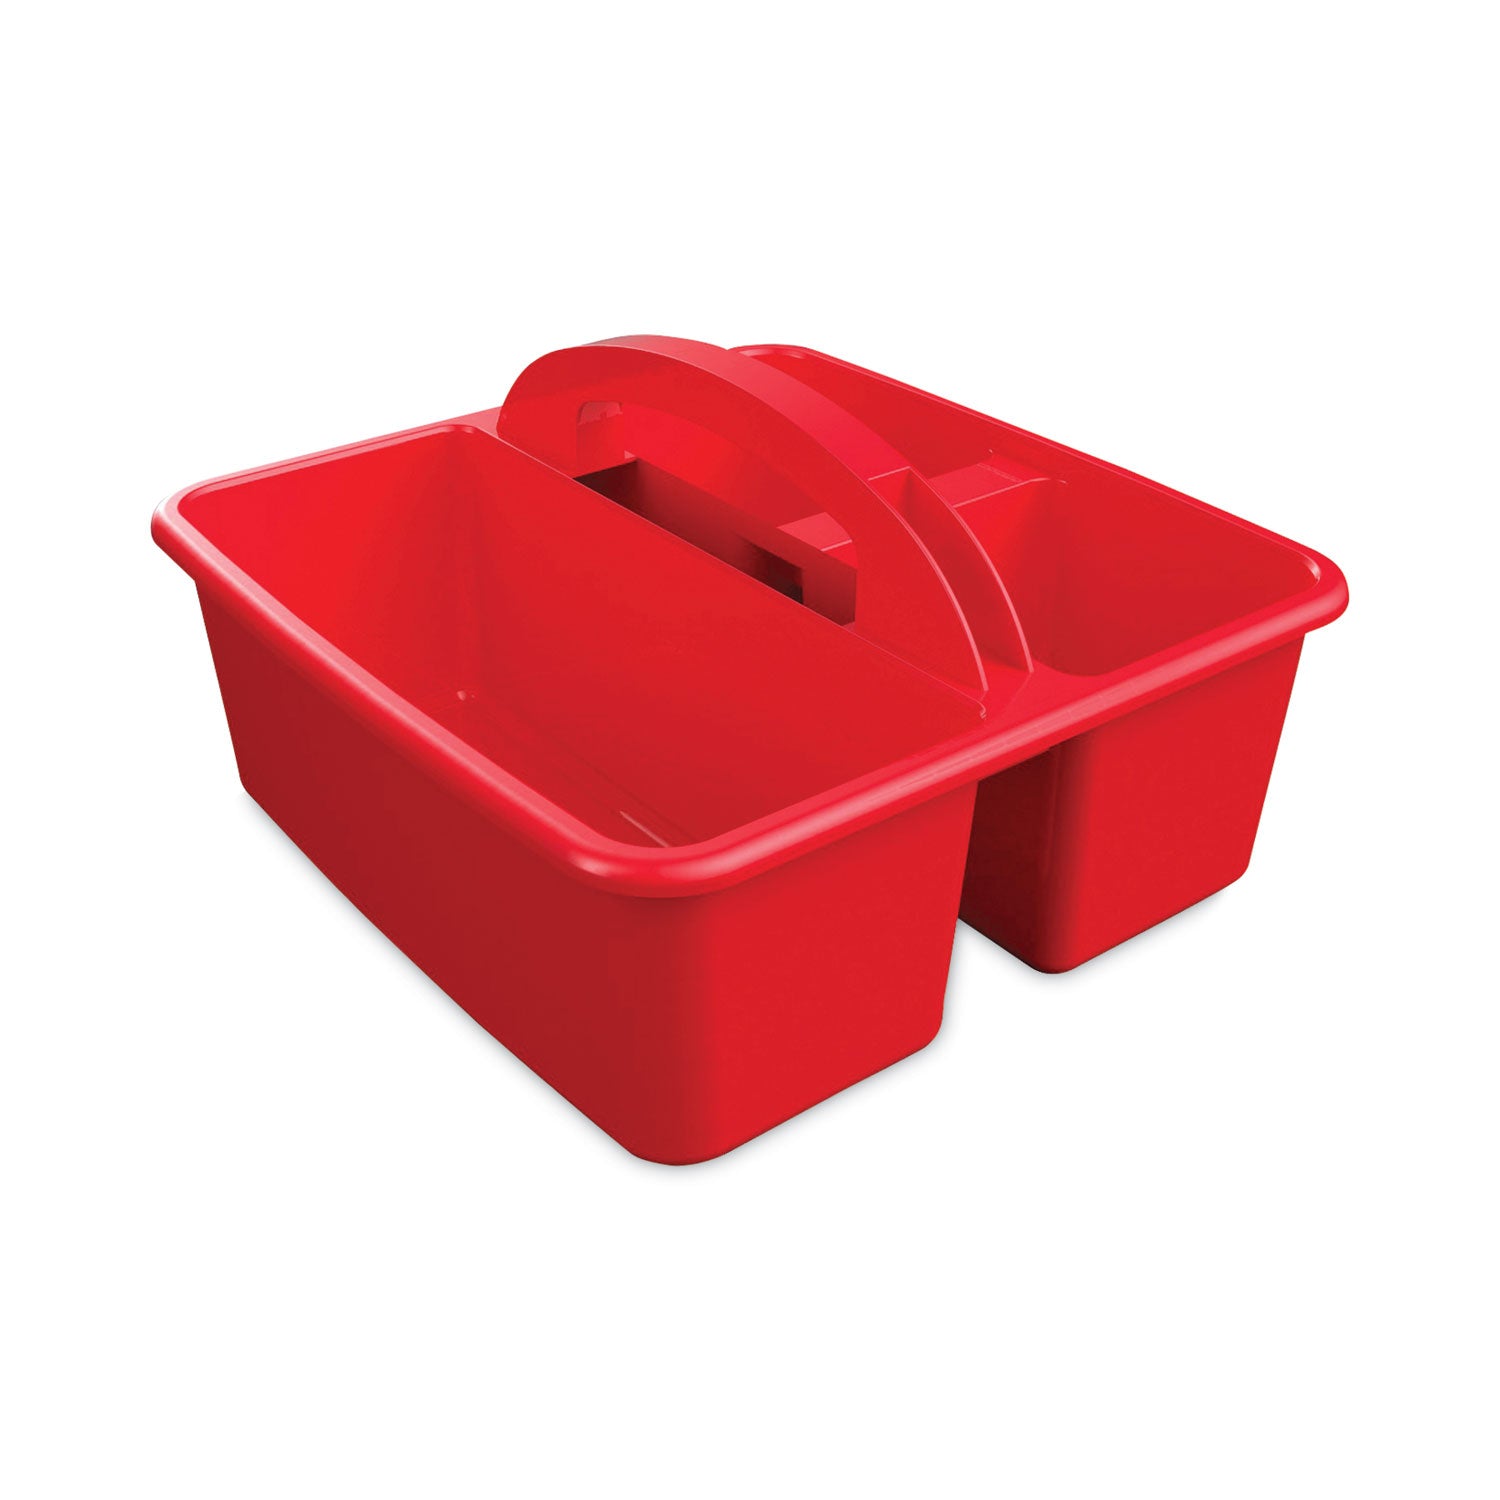 antimicrobial-creativity-storage-caddy-red_def39505red - 3